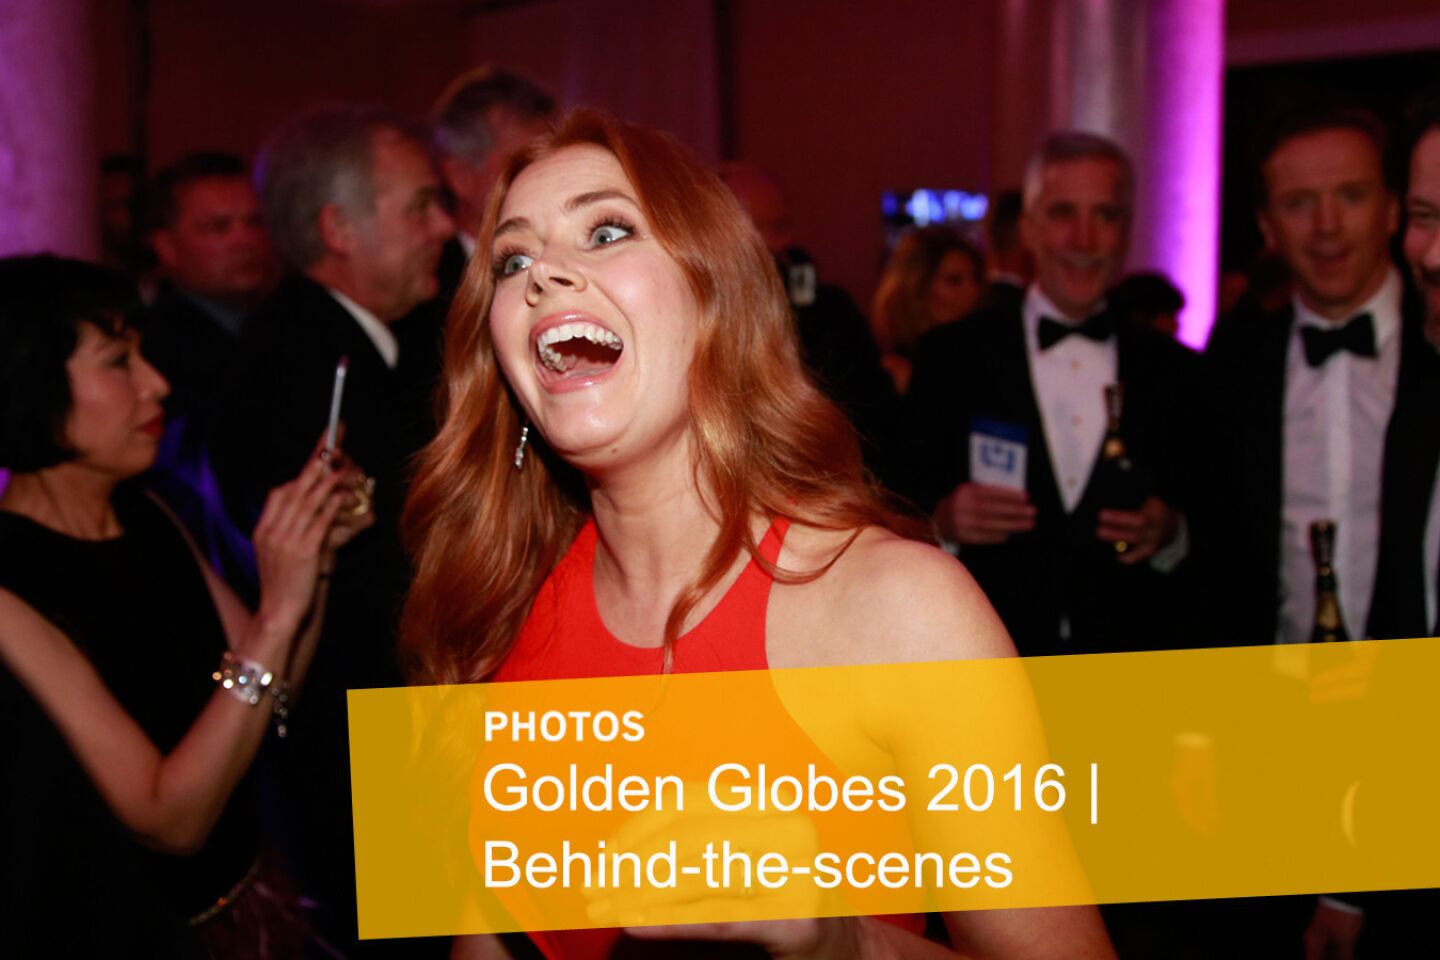 Golden Globes 2016 | Behind-the-scenes moments